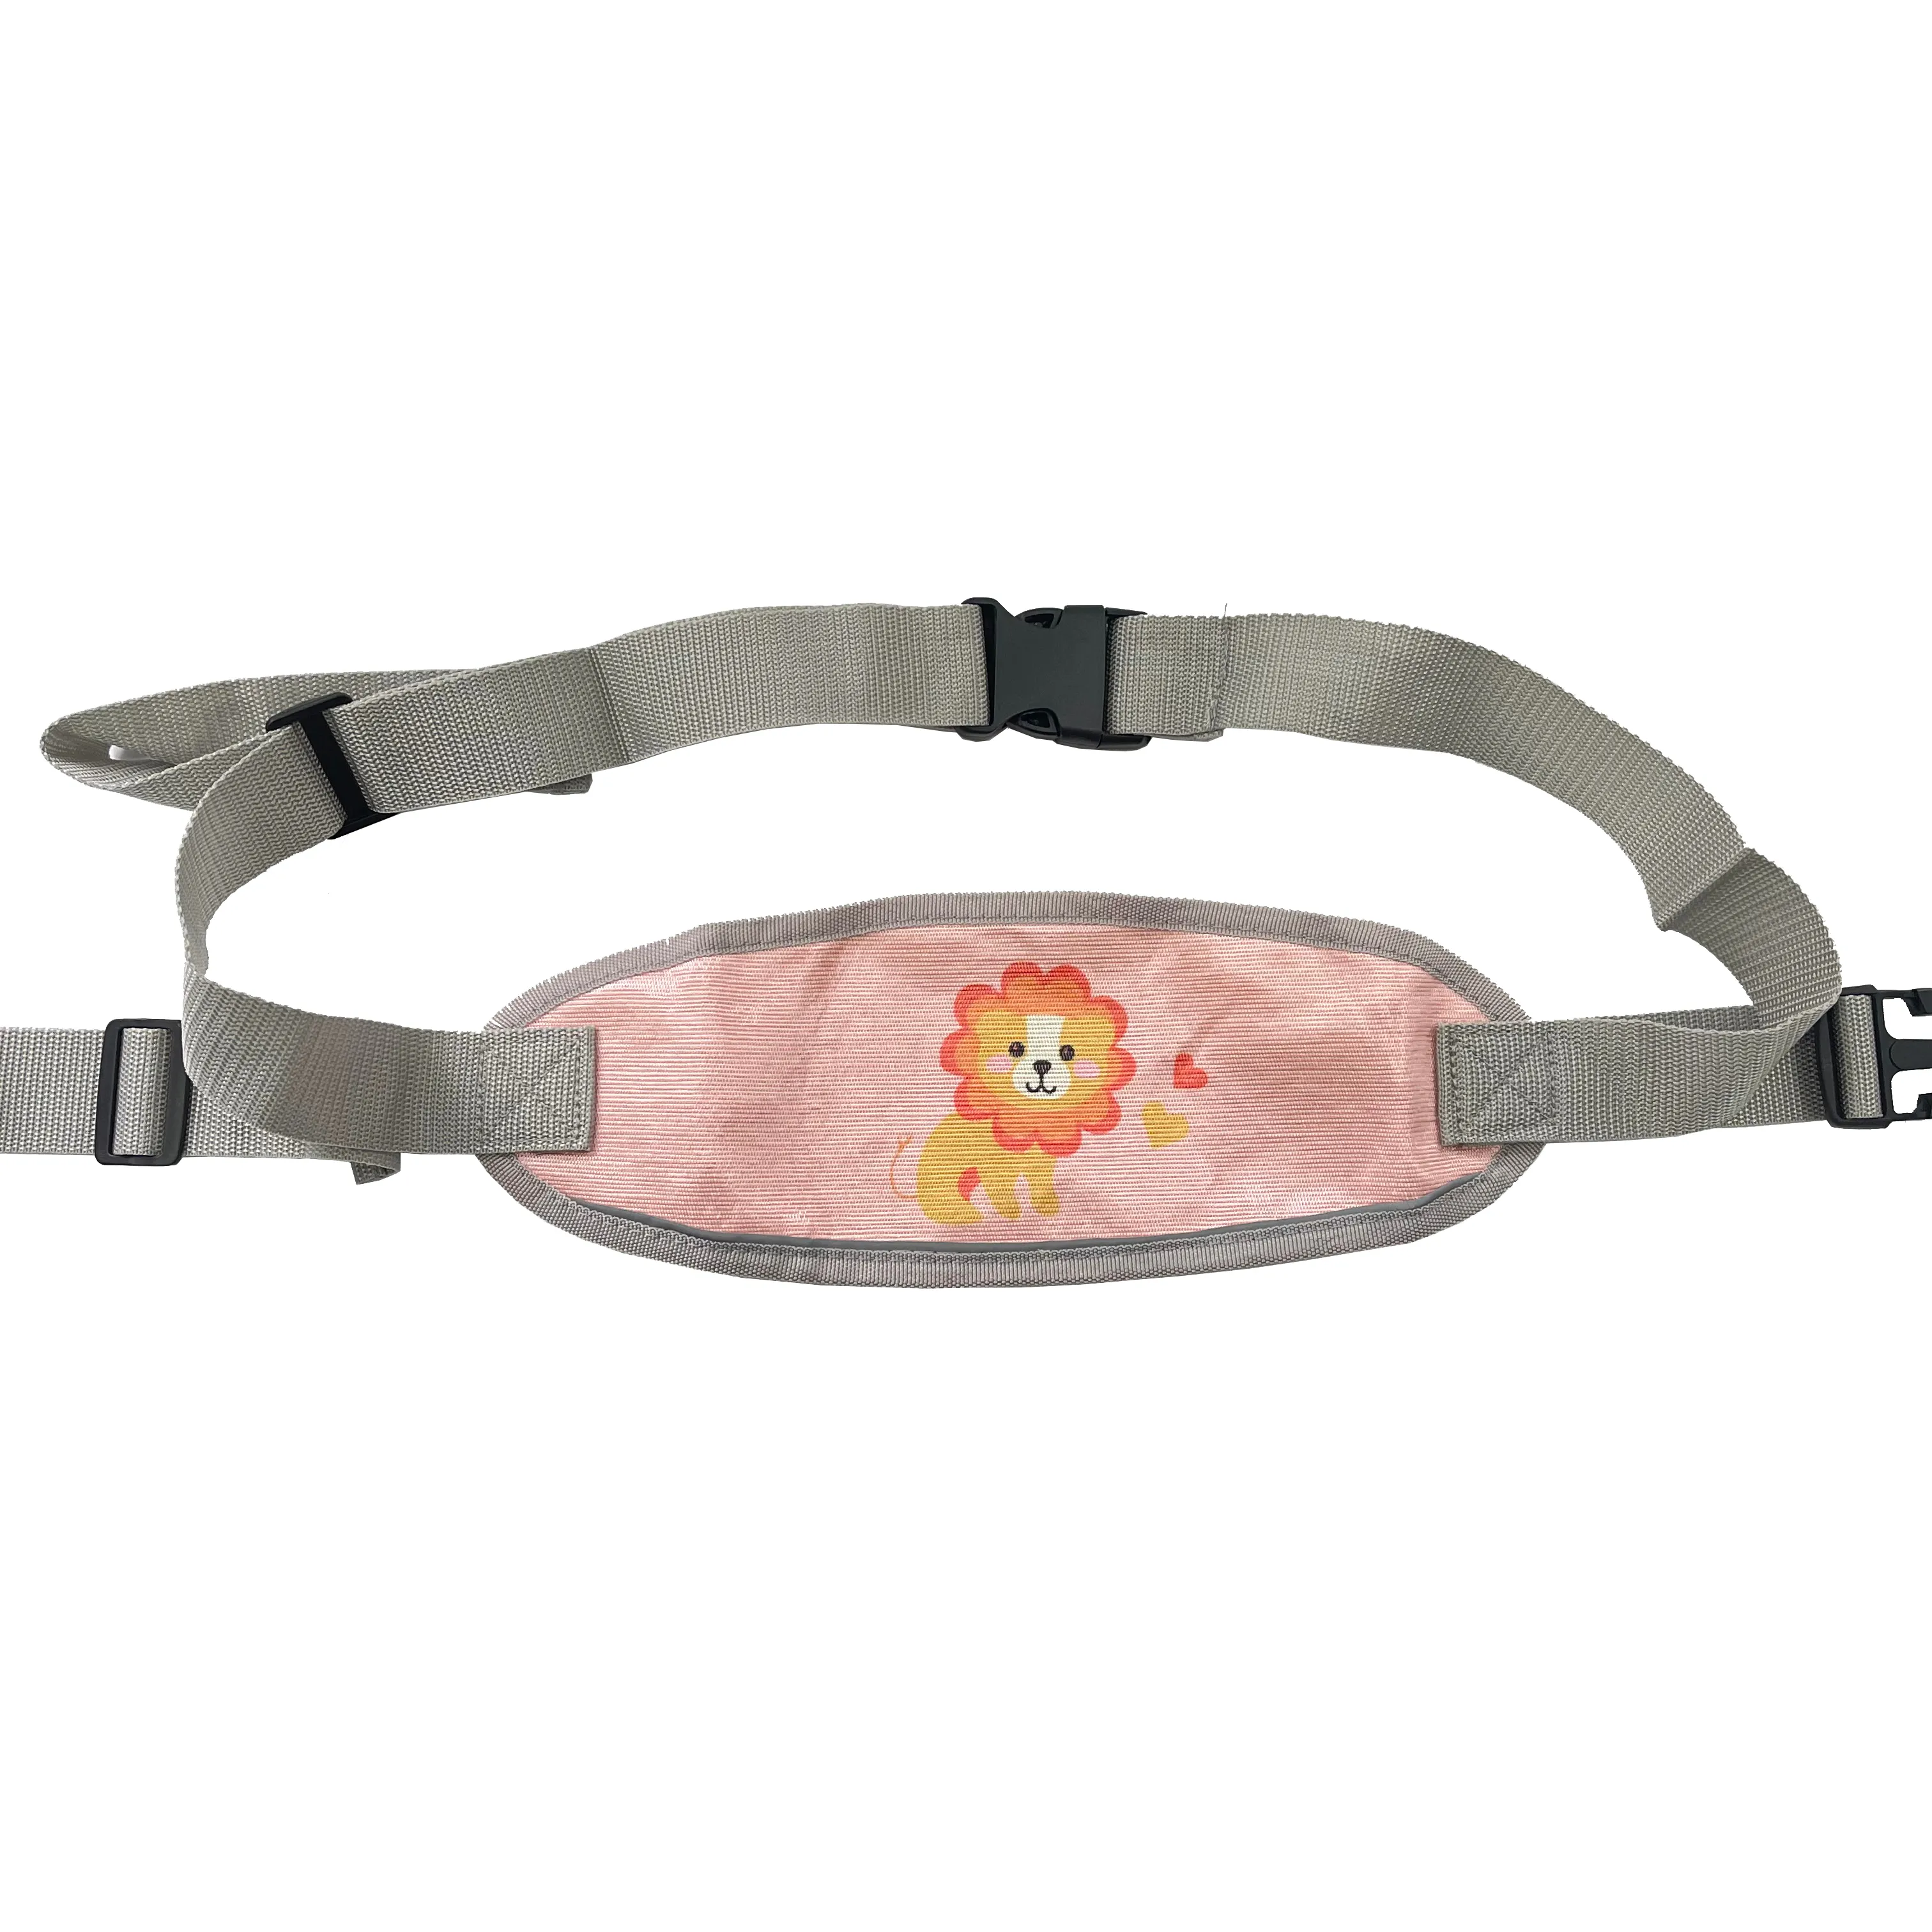 Durable Children Motorcycle Safety Seat Belt with Lovely Cartoon Designs for Kids